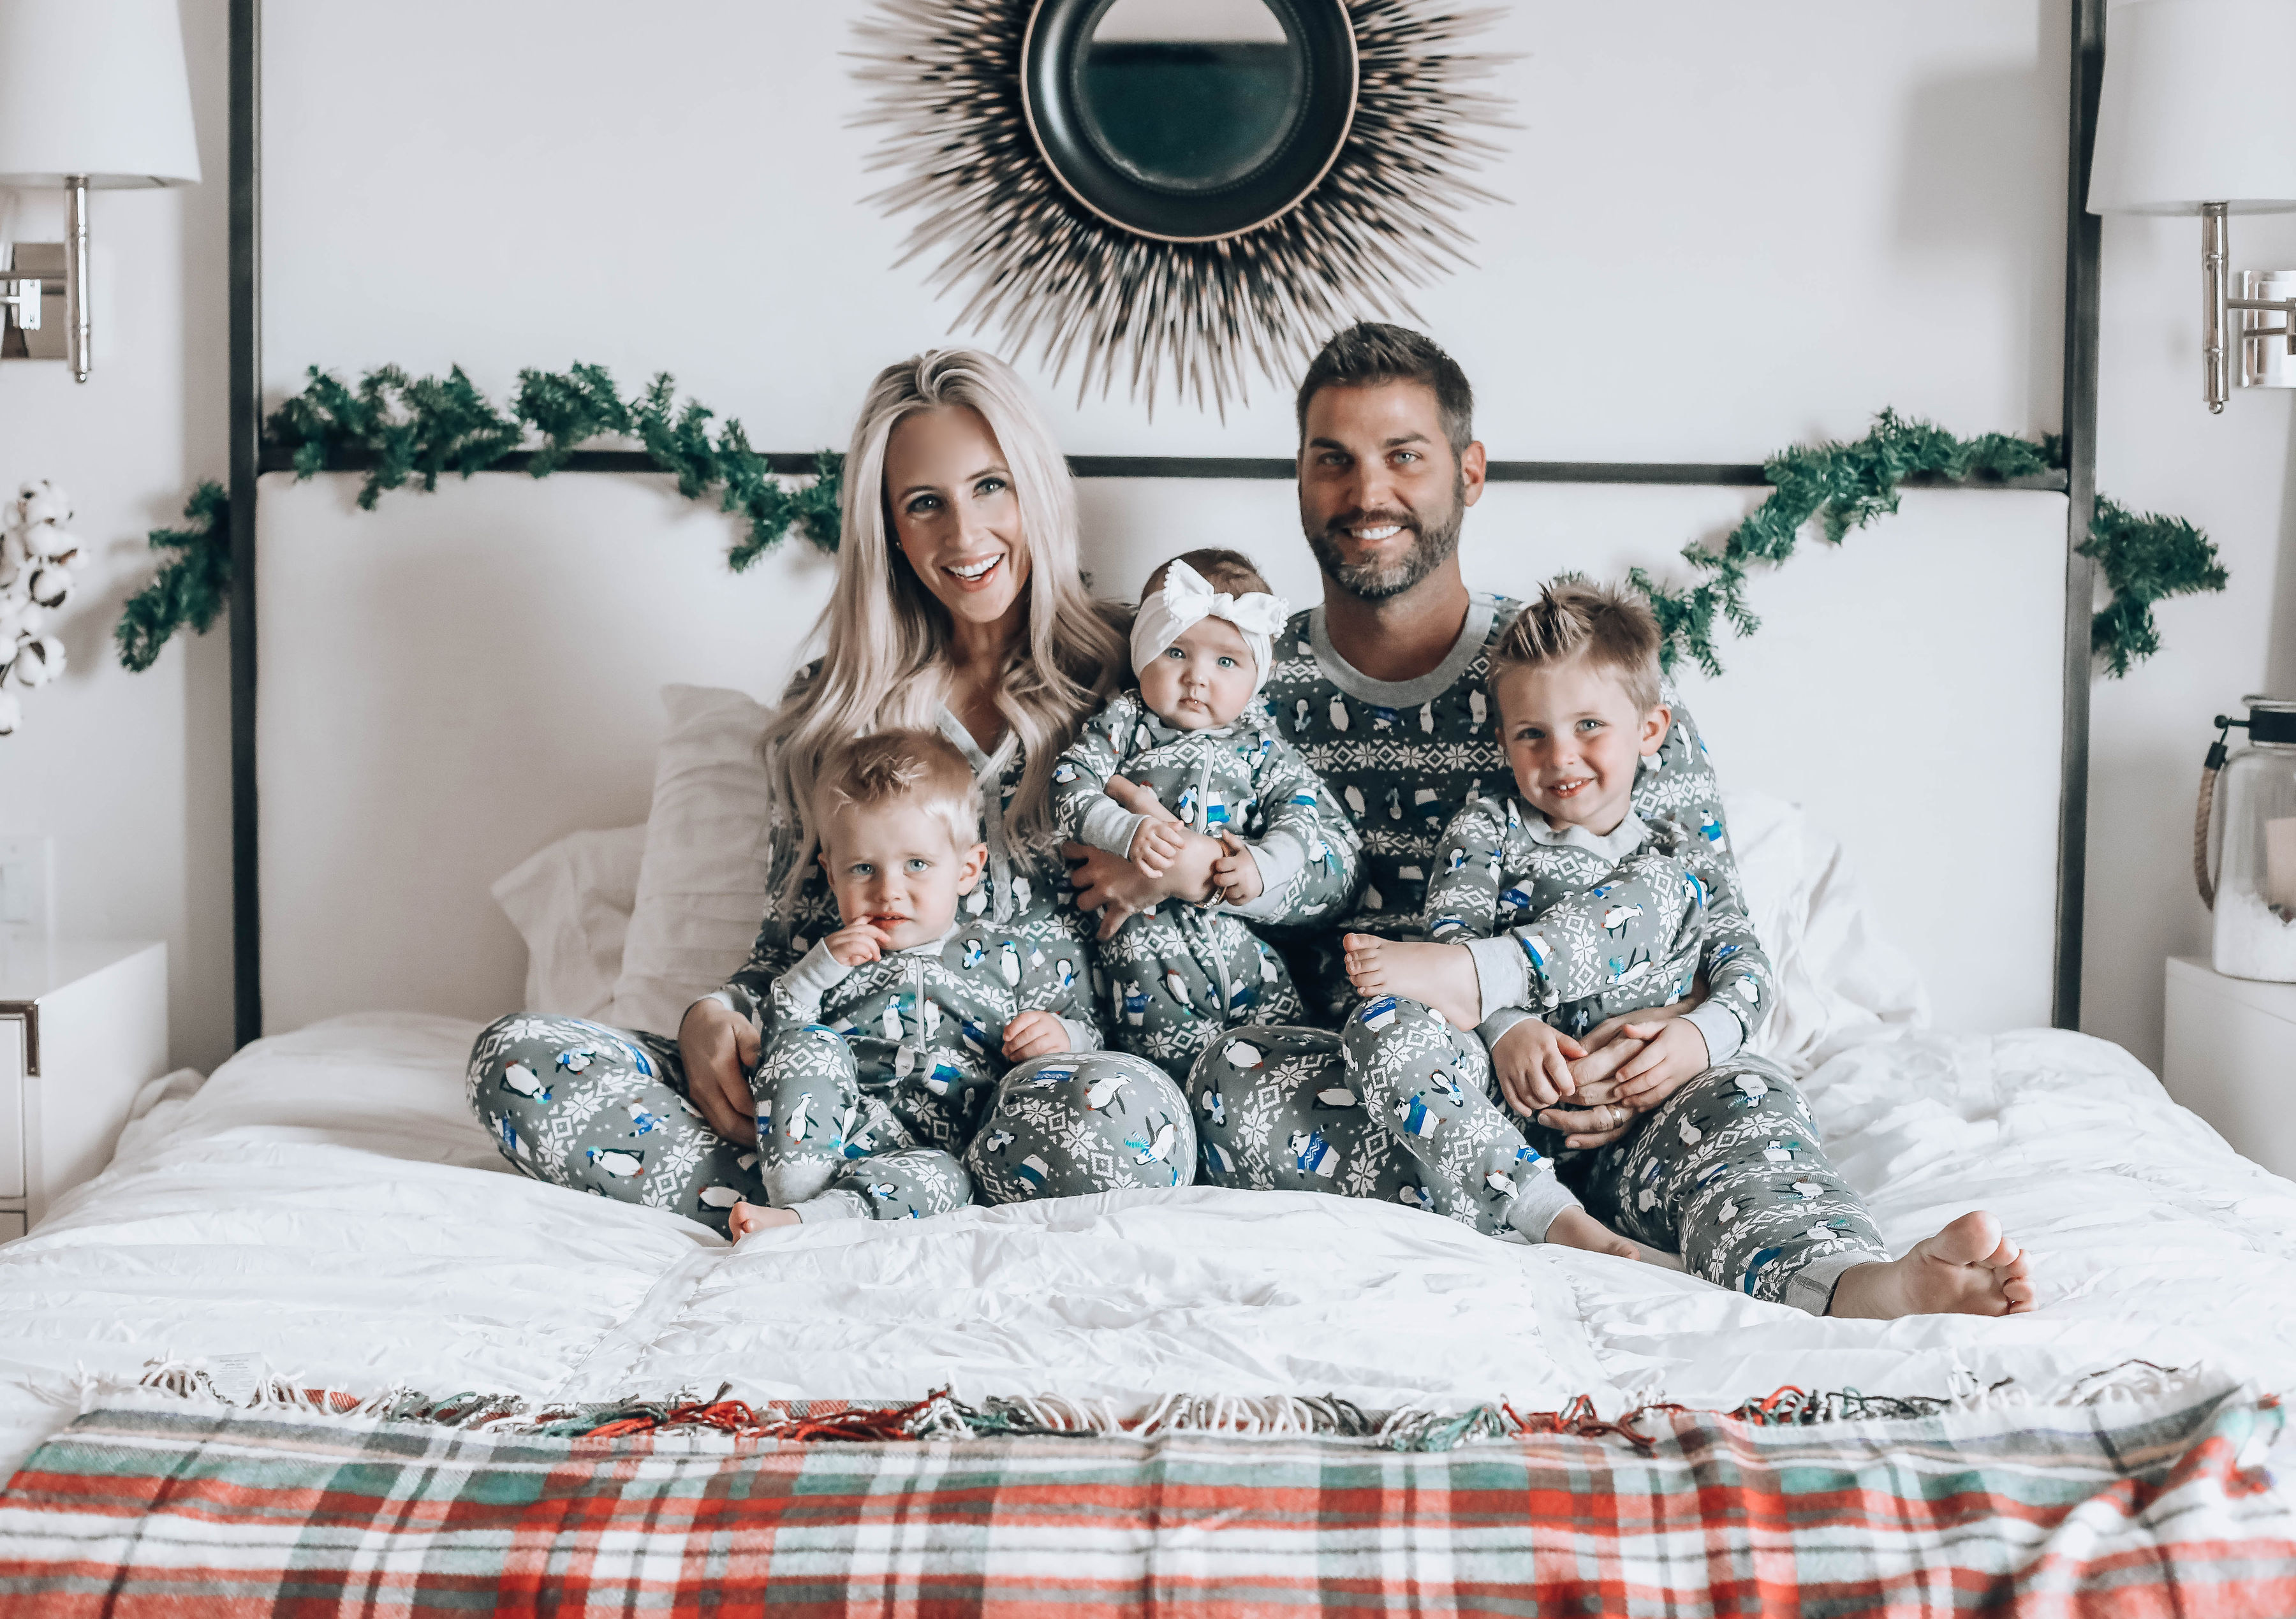 Reno Nevada Blogger, Emily Farren Wieczorek of Two Peas in a Prada, shares her favorite matching Christmas Pajamas from Hanna Andersson! 